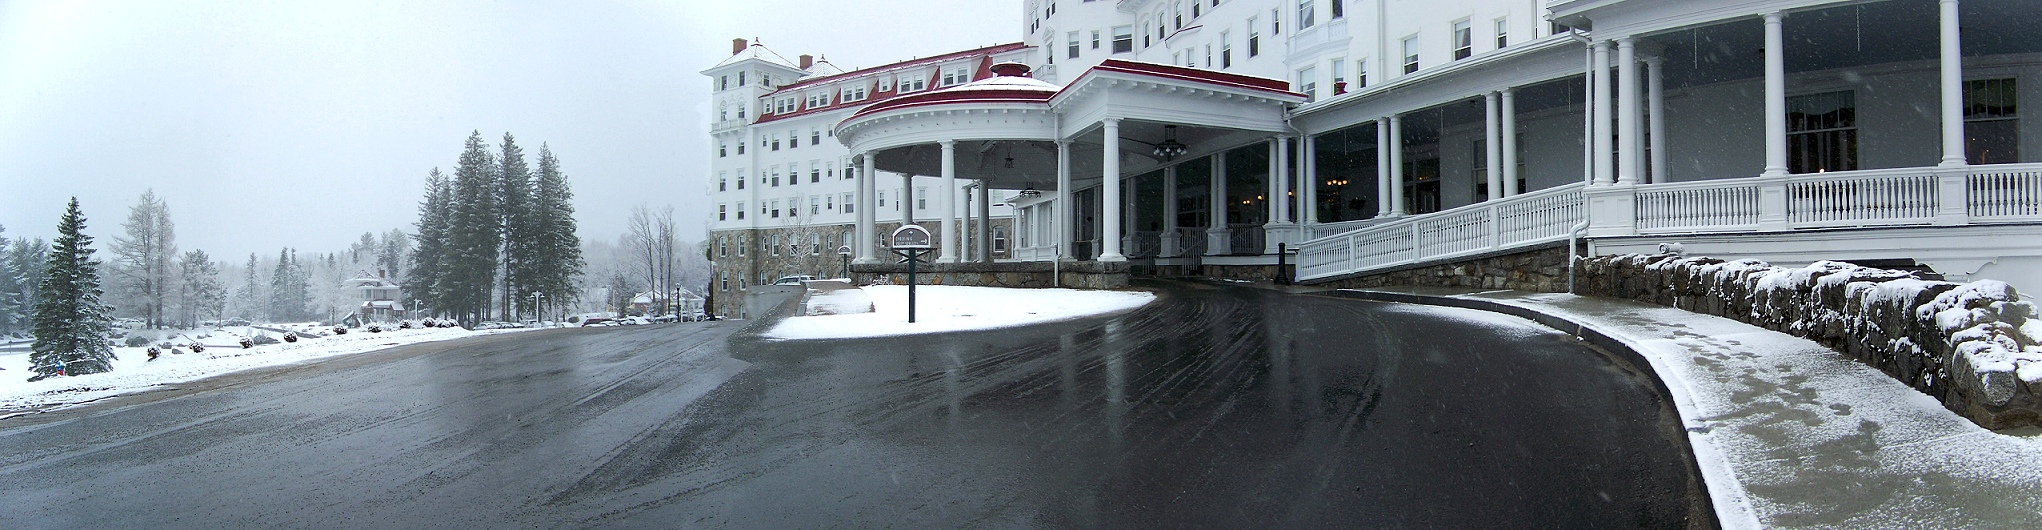 Panoramic Mt. Washington Hotel Entrance (user submitted)